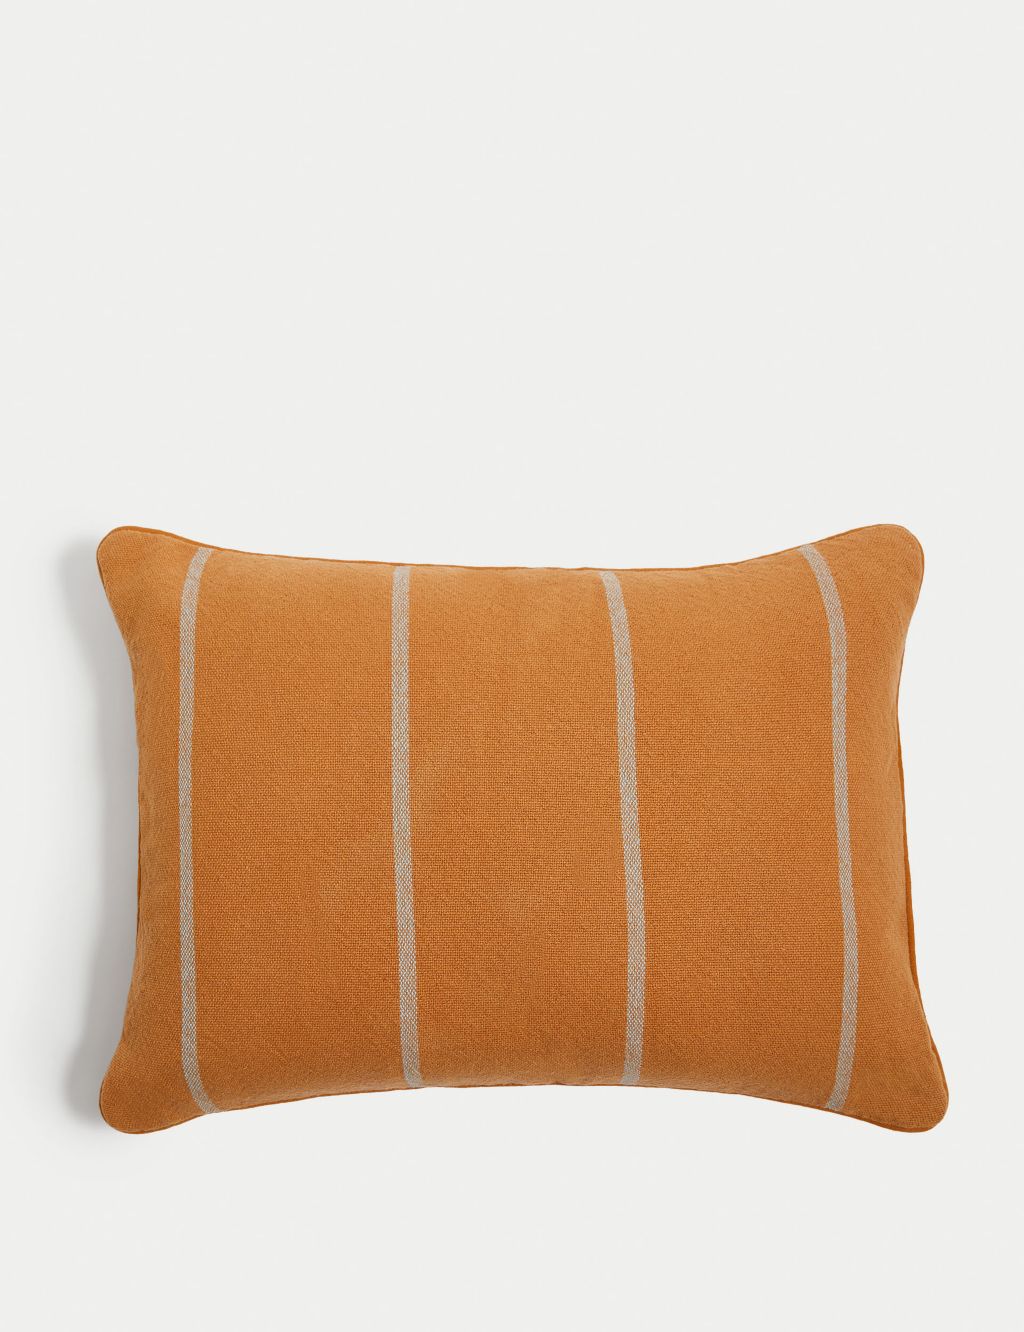 Pure Cotton Striped Bolster Cushion image 1